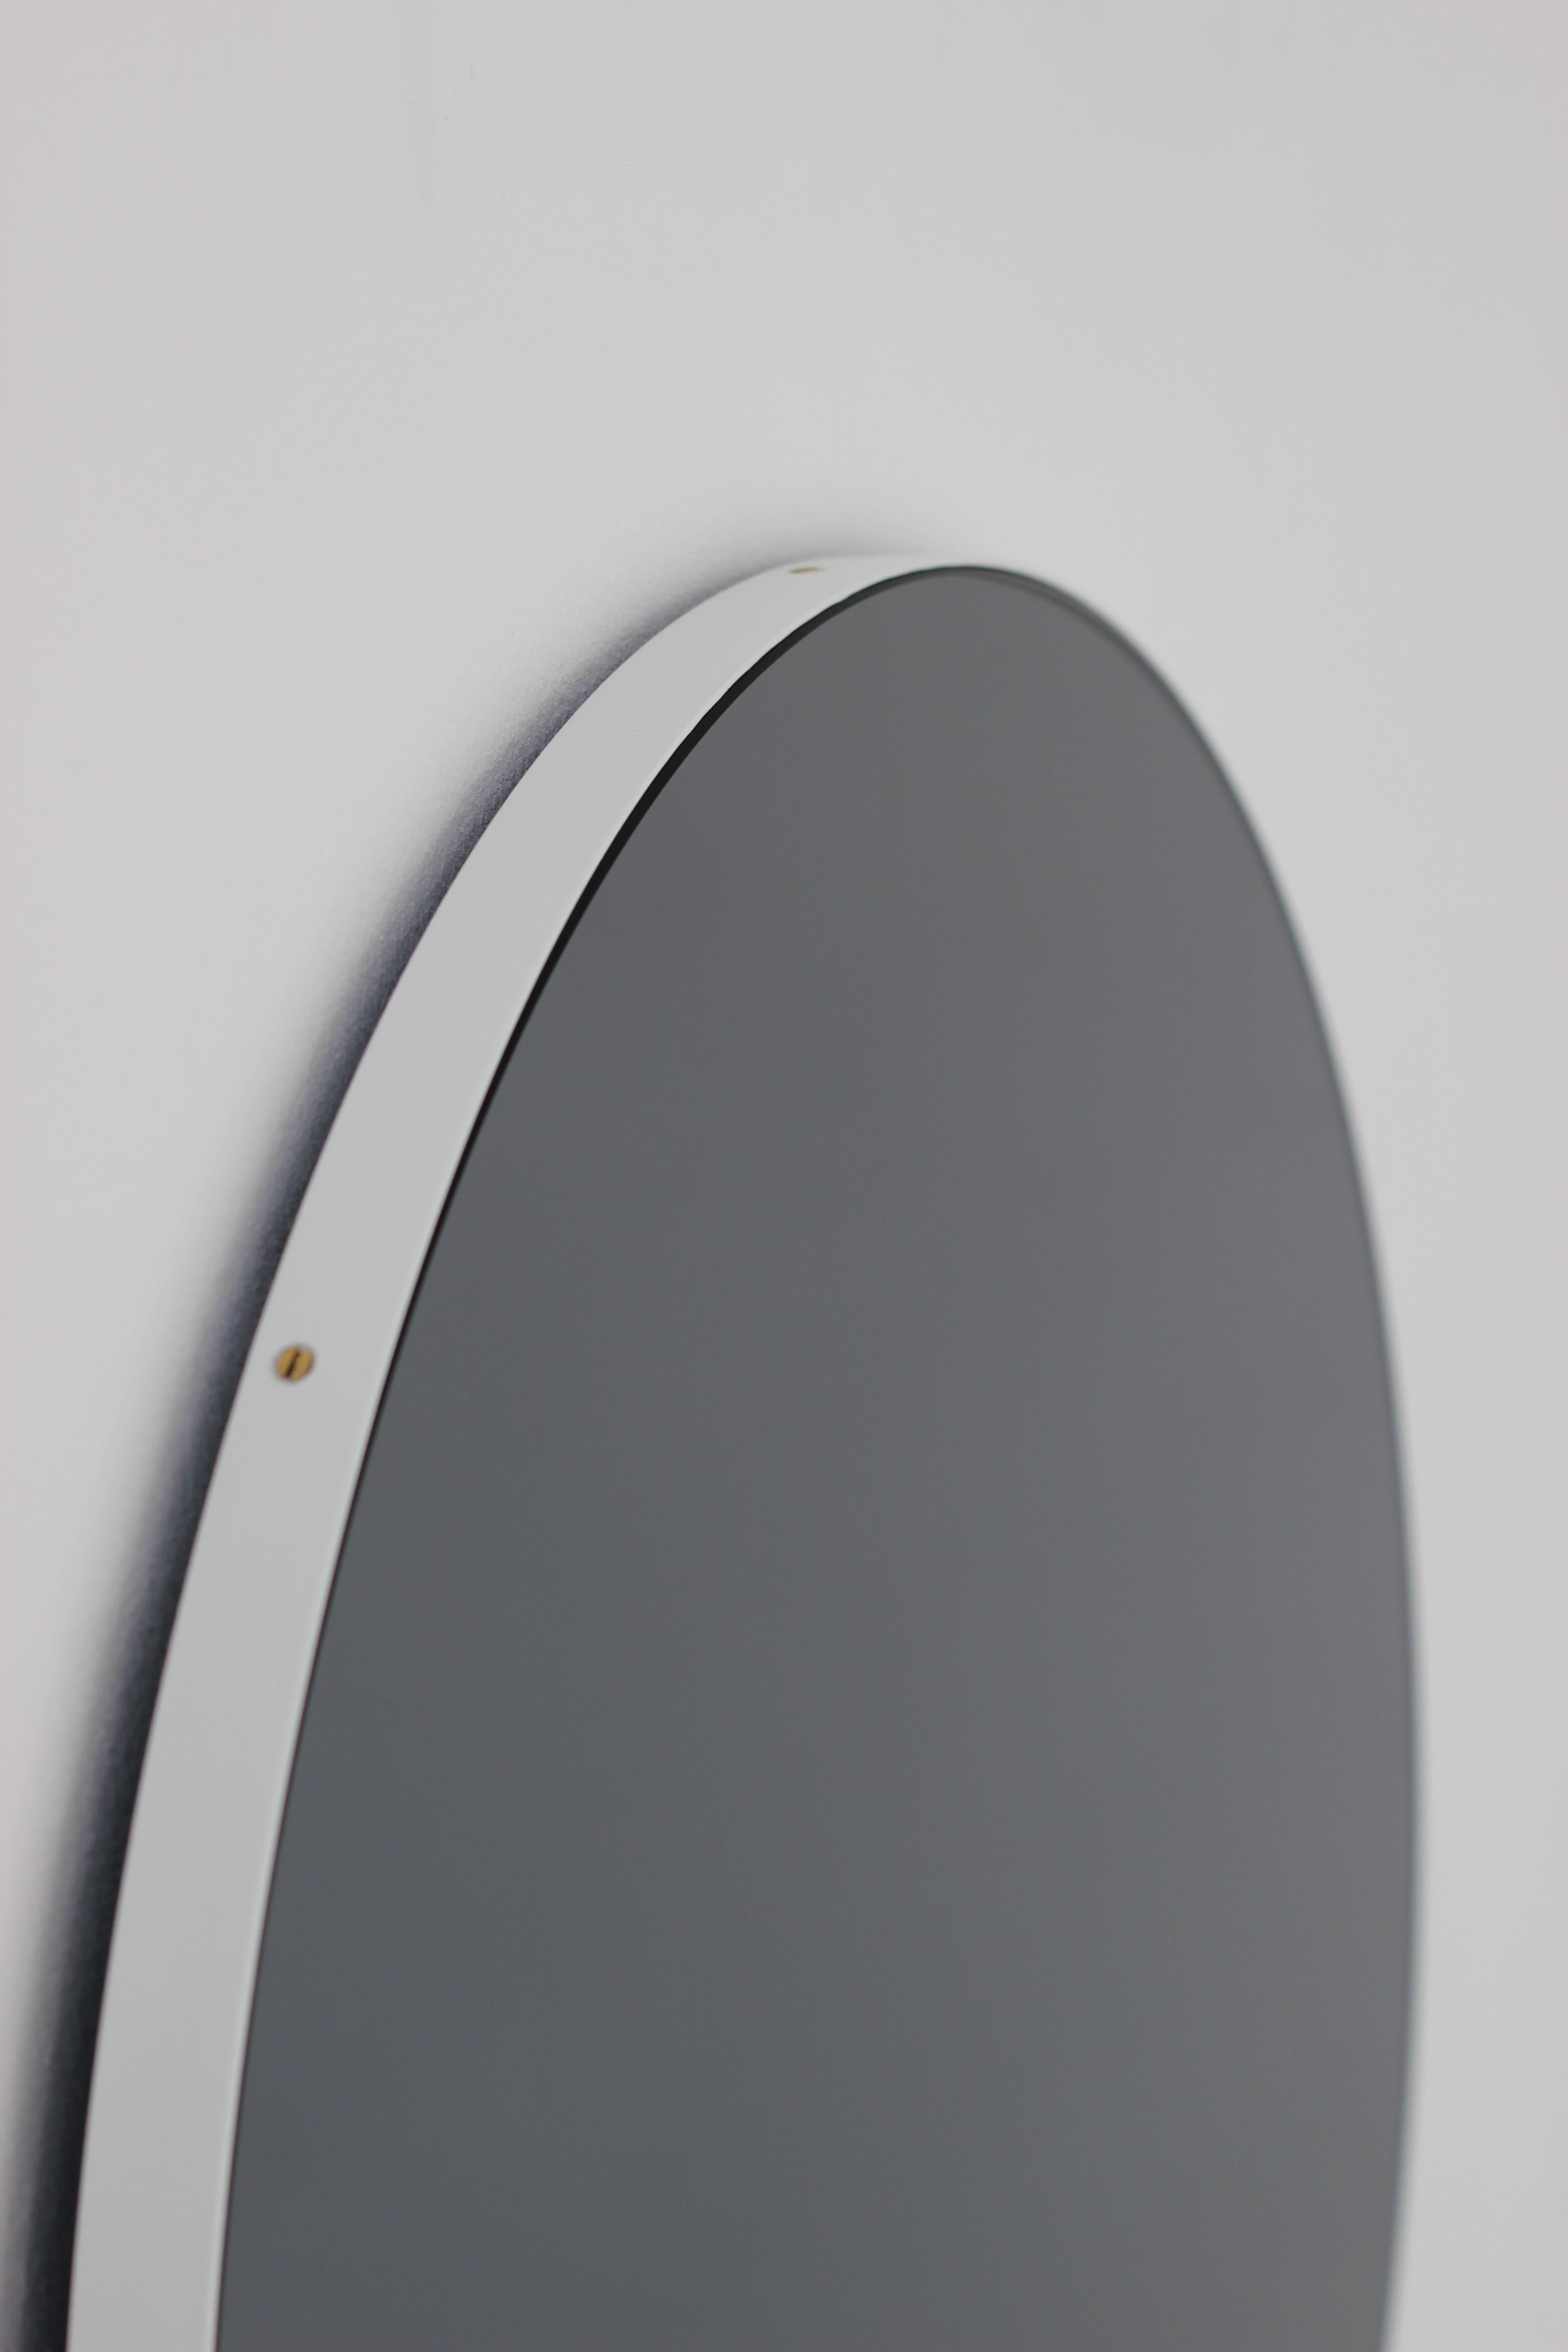 Aluminum Orbis Black Tinted Bespoke Contemporary Round Mirror with White Frame - Large